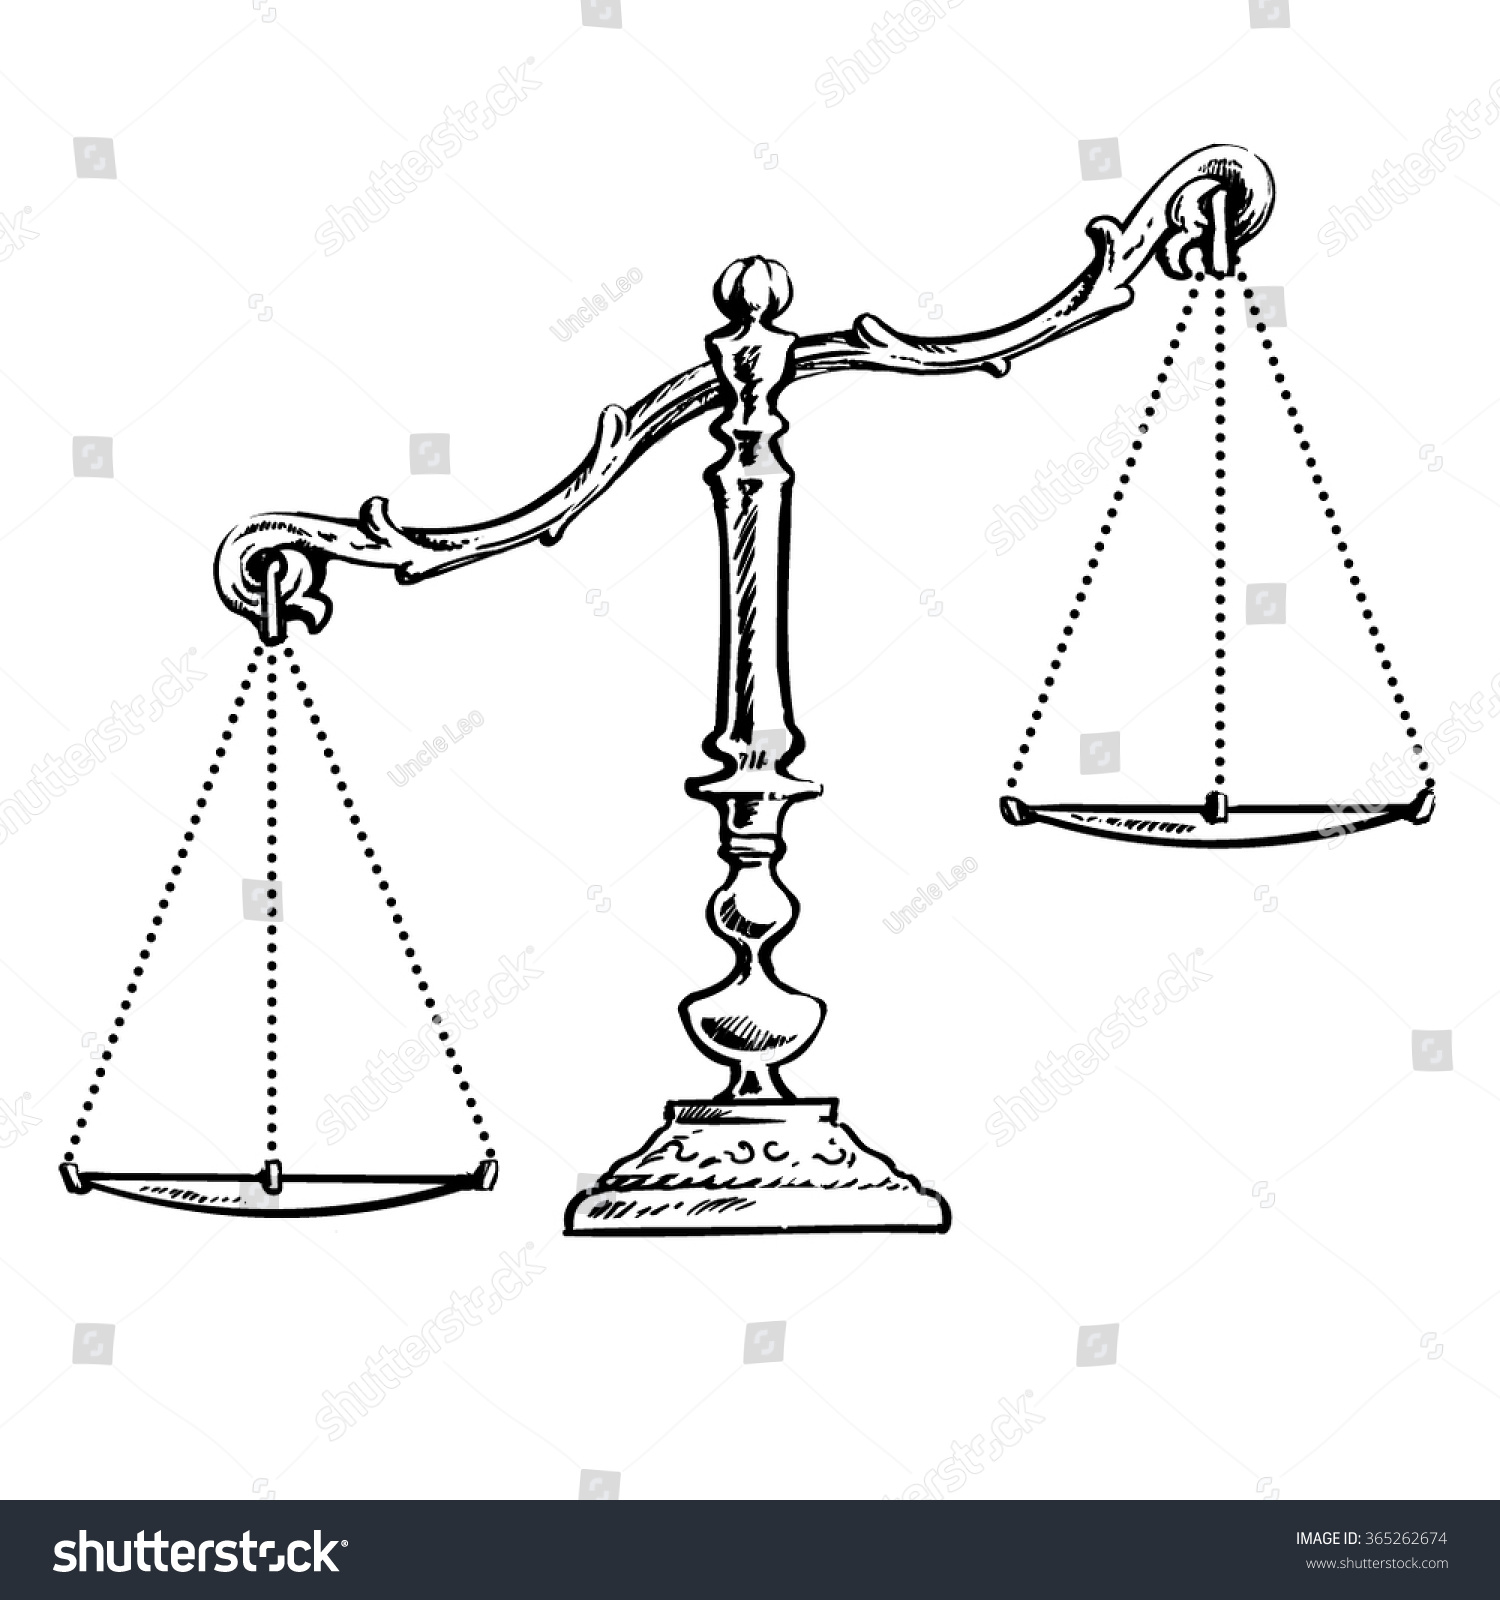 Scales Sketch Hand Drawn Vector Illustration Stock Vector (Royalty Free